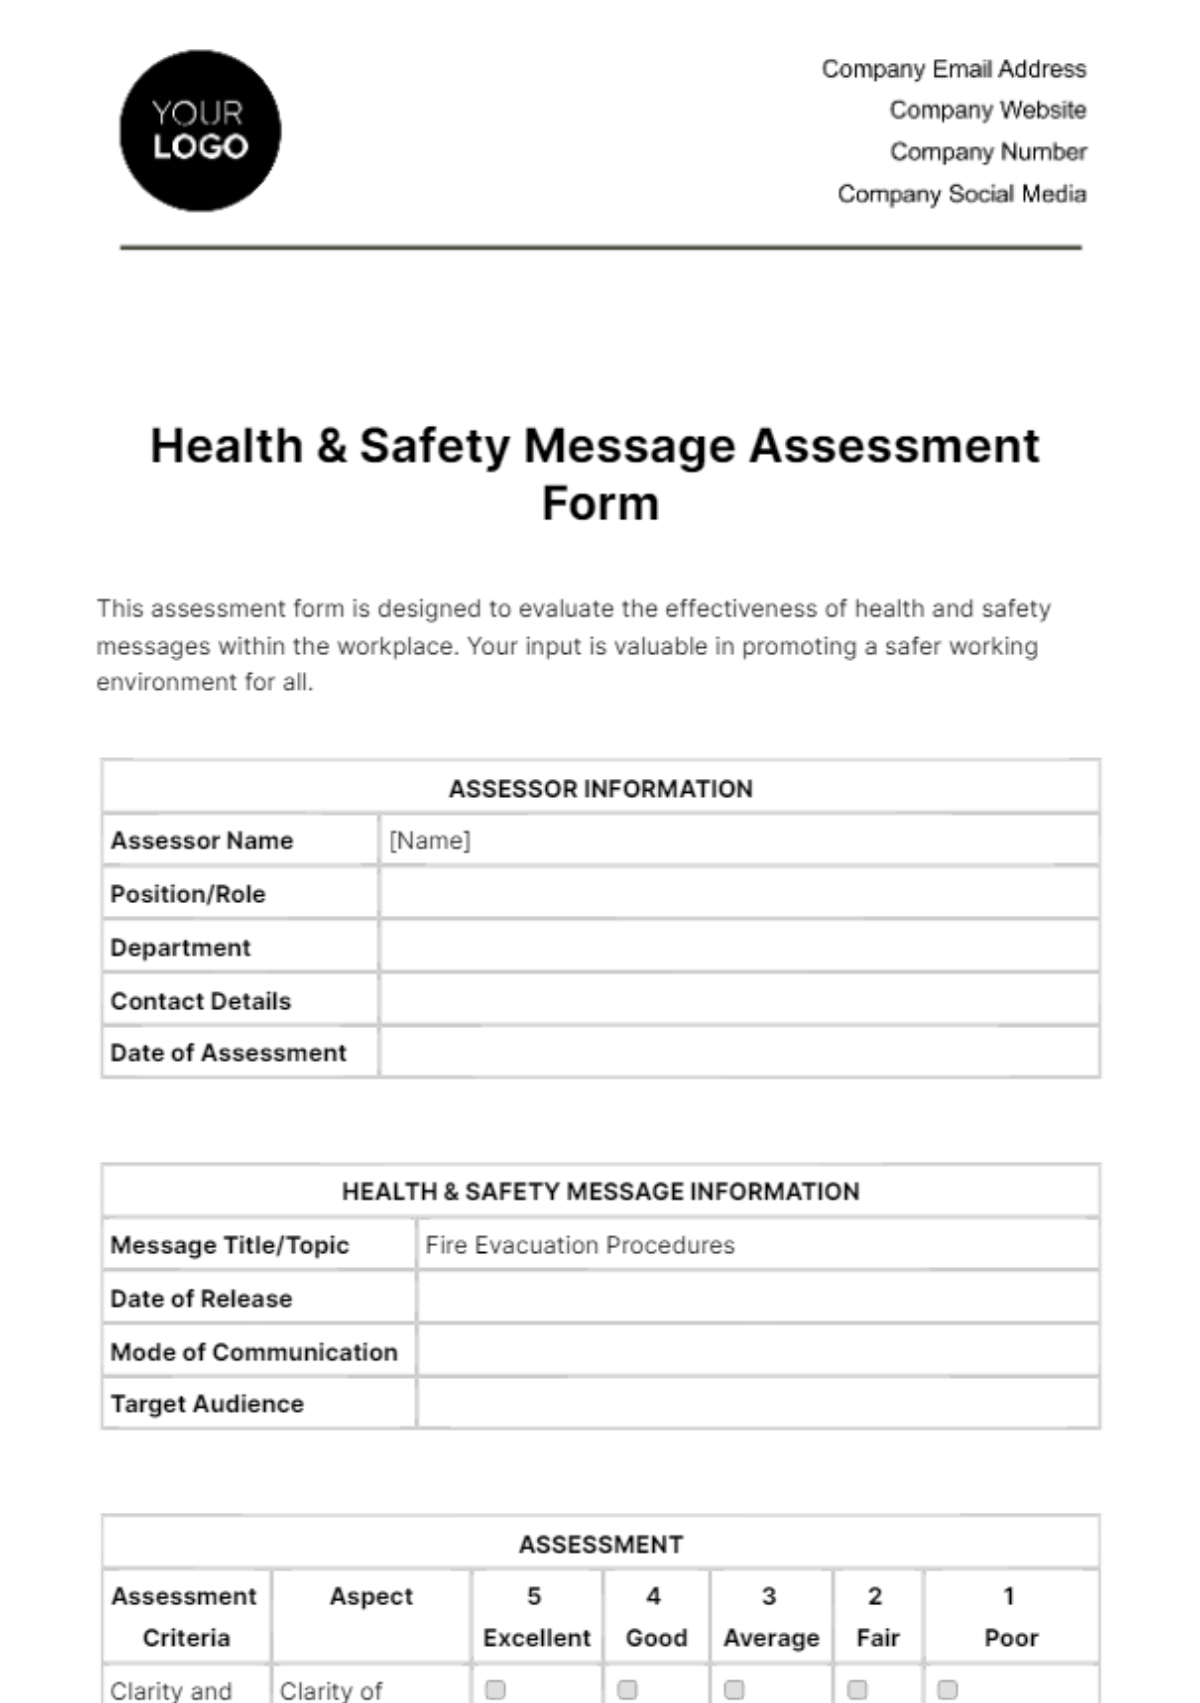 Health & Safety Message Assessment Form Template